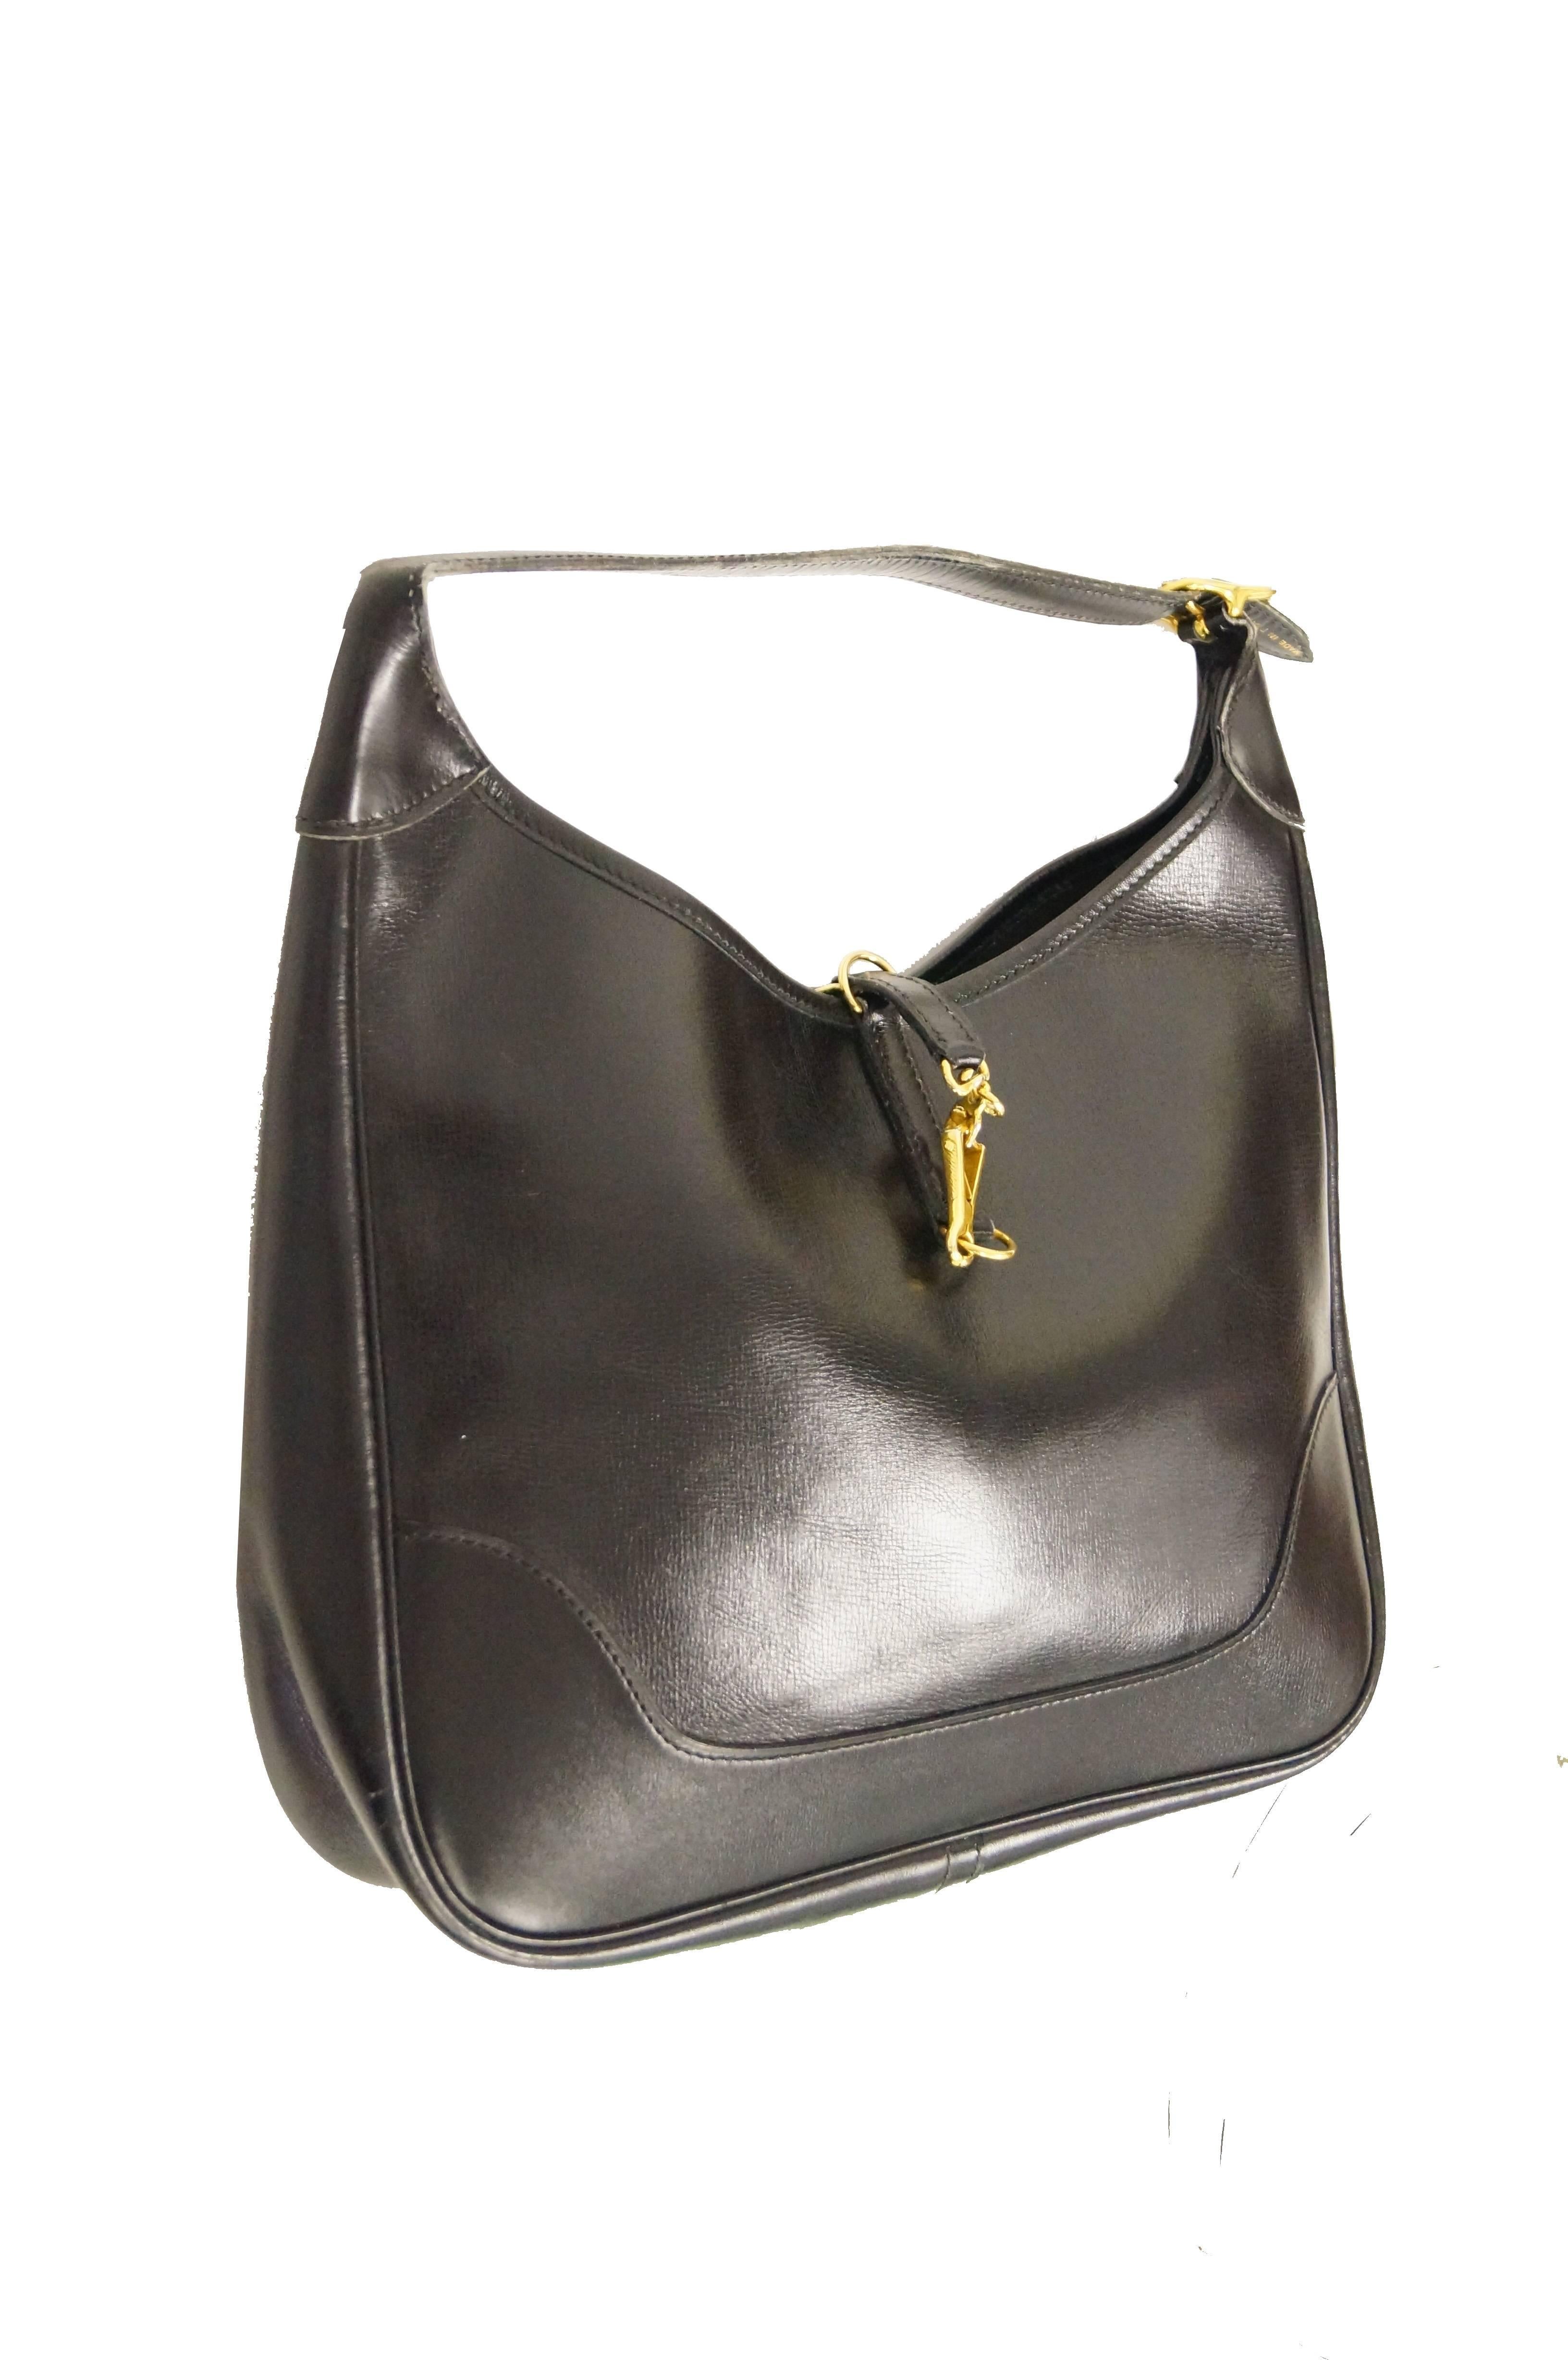 Classic glossy black leather Hermes trim bag. This shoulder bag features an elegant, streamlined rectangular body with curved edges and a short adjustable shoulder strap. The handbag has an open top with single pressure lock lobster clasp closure.